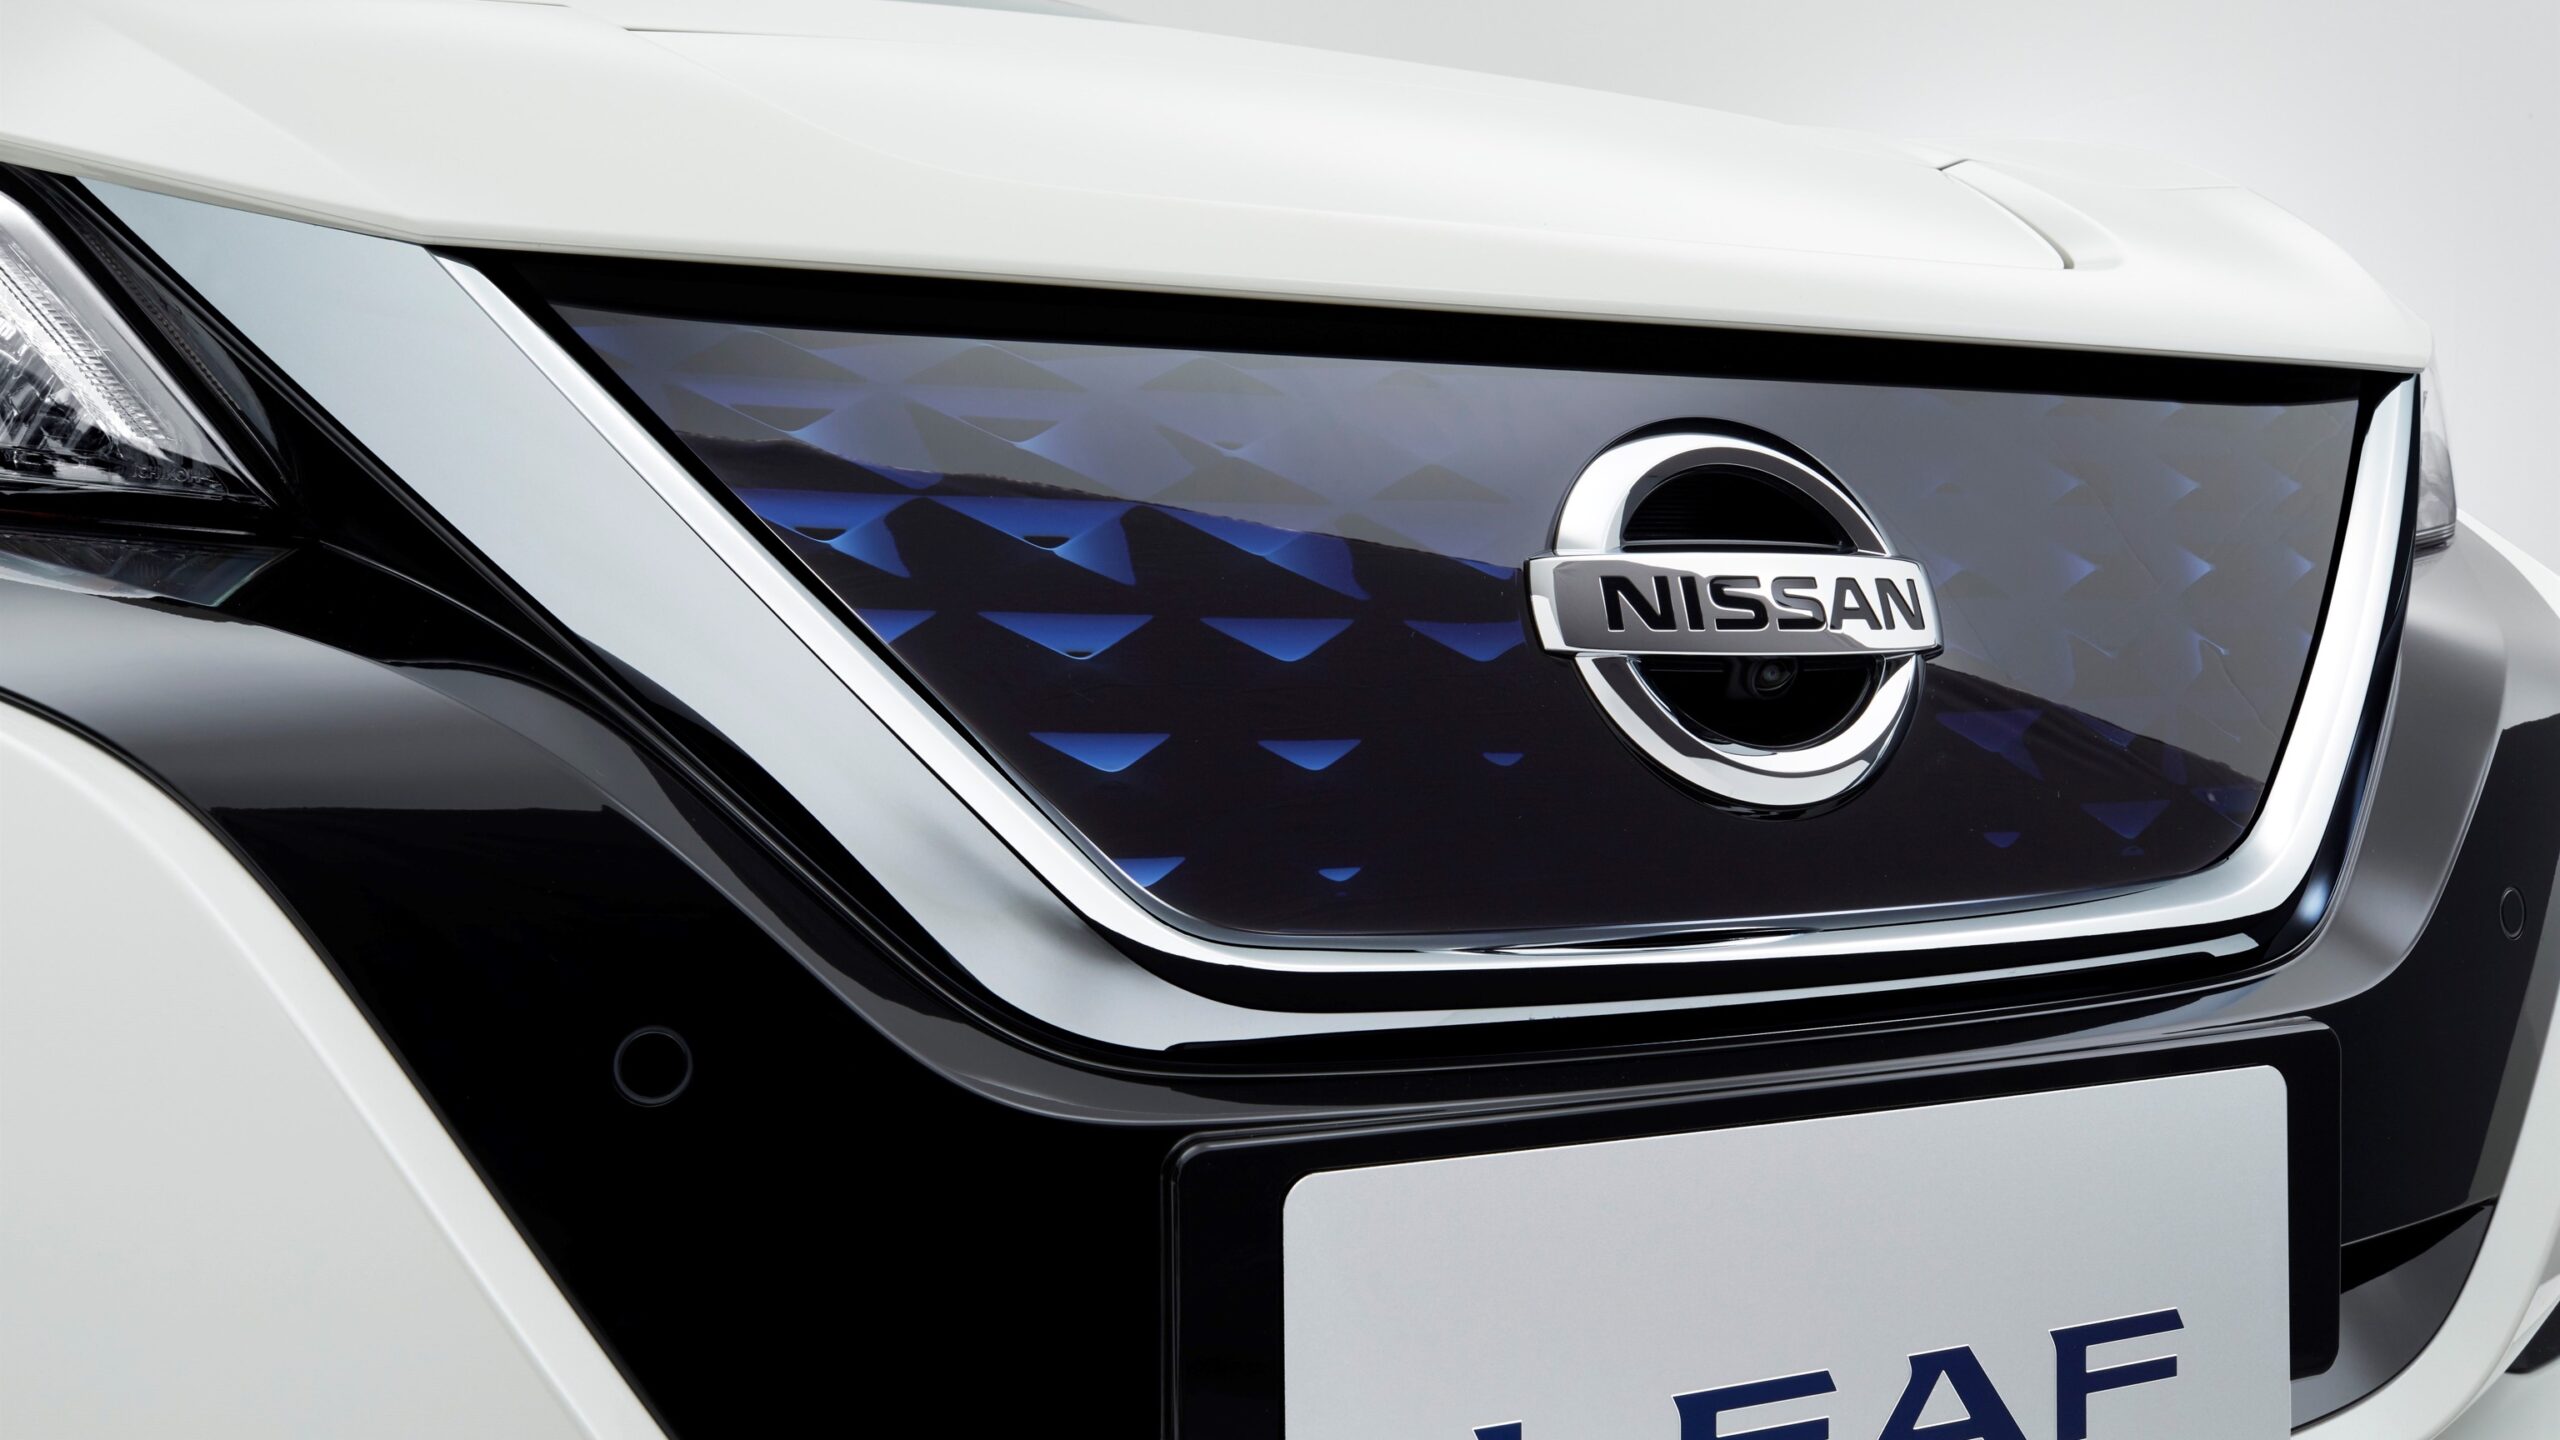 Nissan Leaf 11 scaled - 2022 Nissan Leaf : Price, Specs, Range and Picture